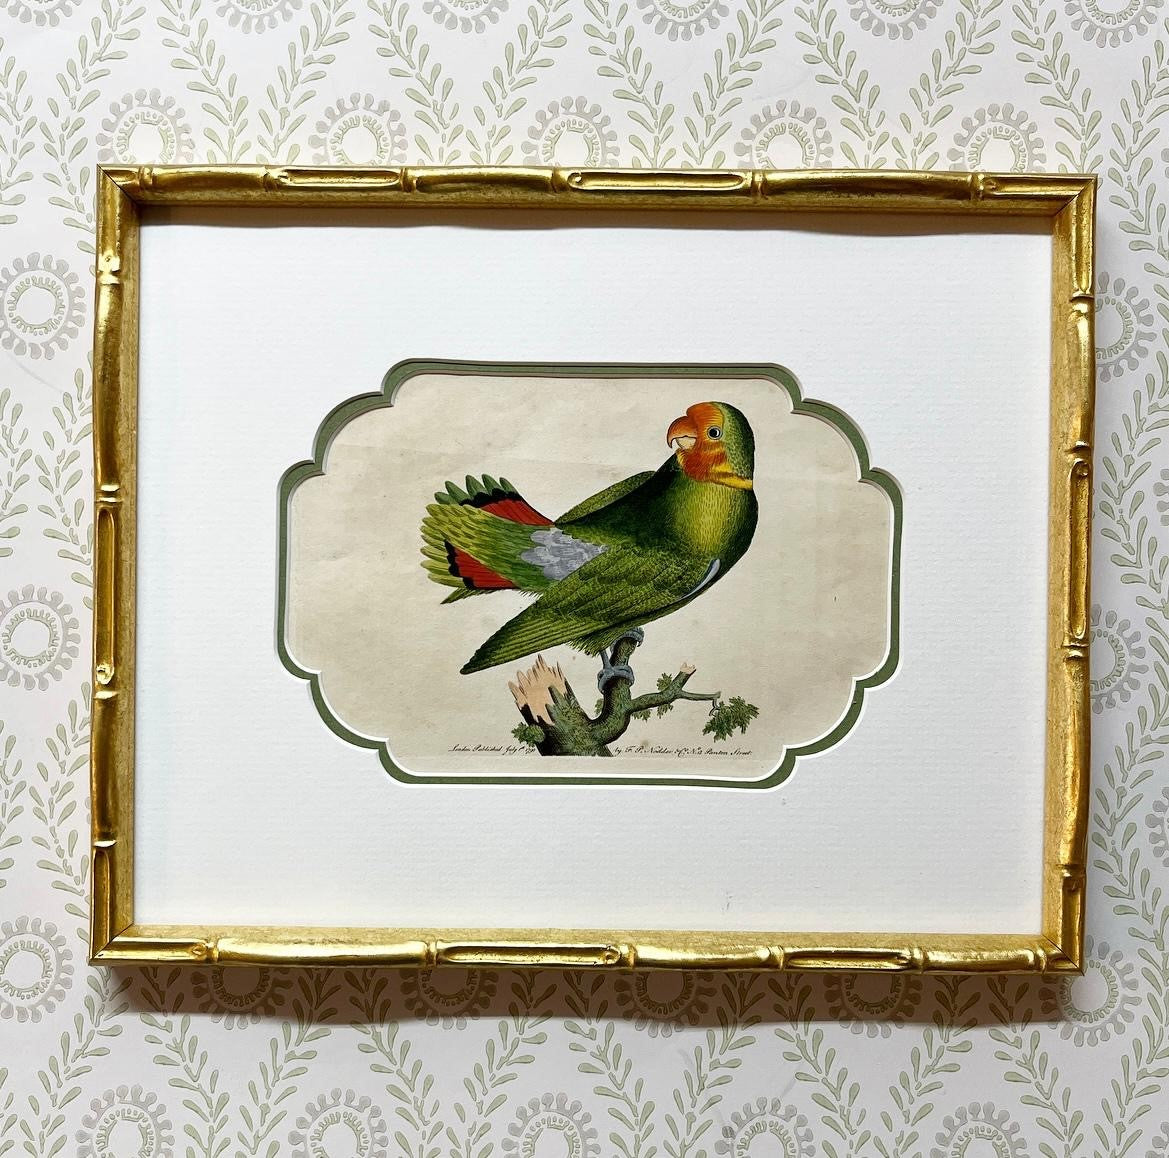 A Set of Three 19th century Engravings of Parrots by Frederick Polydore Nodder (fl 1770-1800)